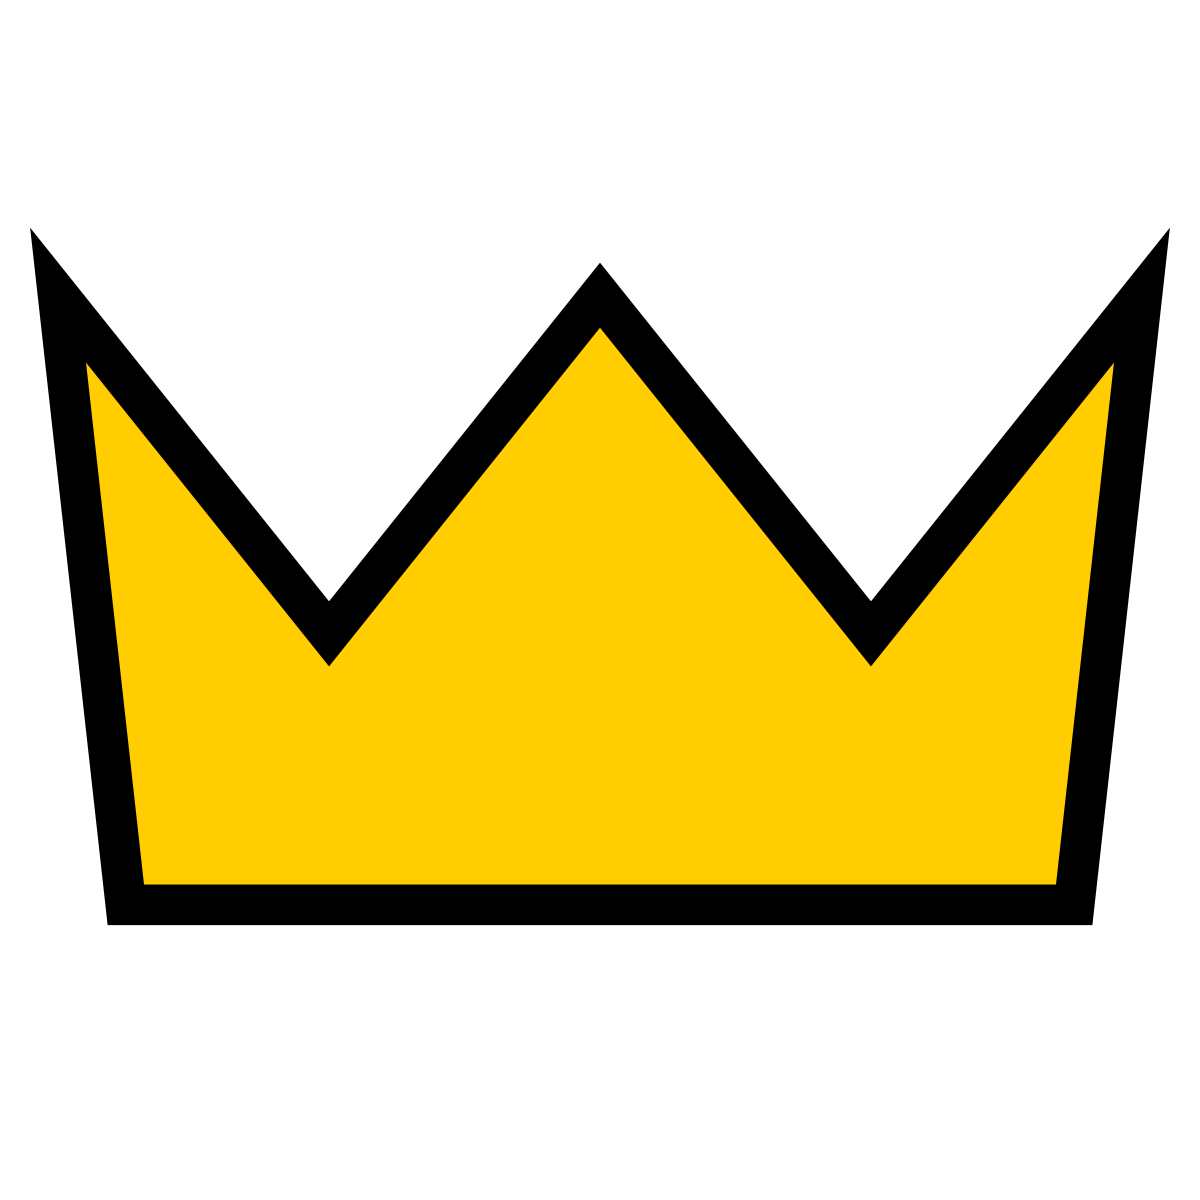 Download File:Simple gold crown.svg - Wikipedia